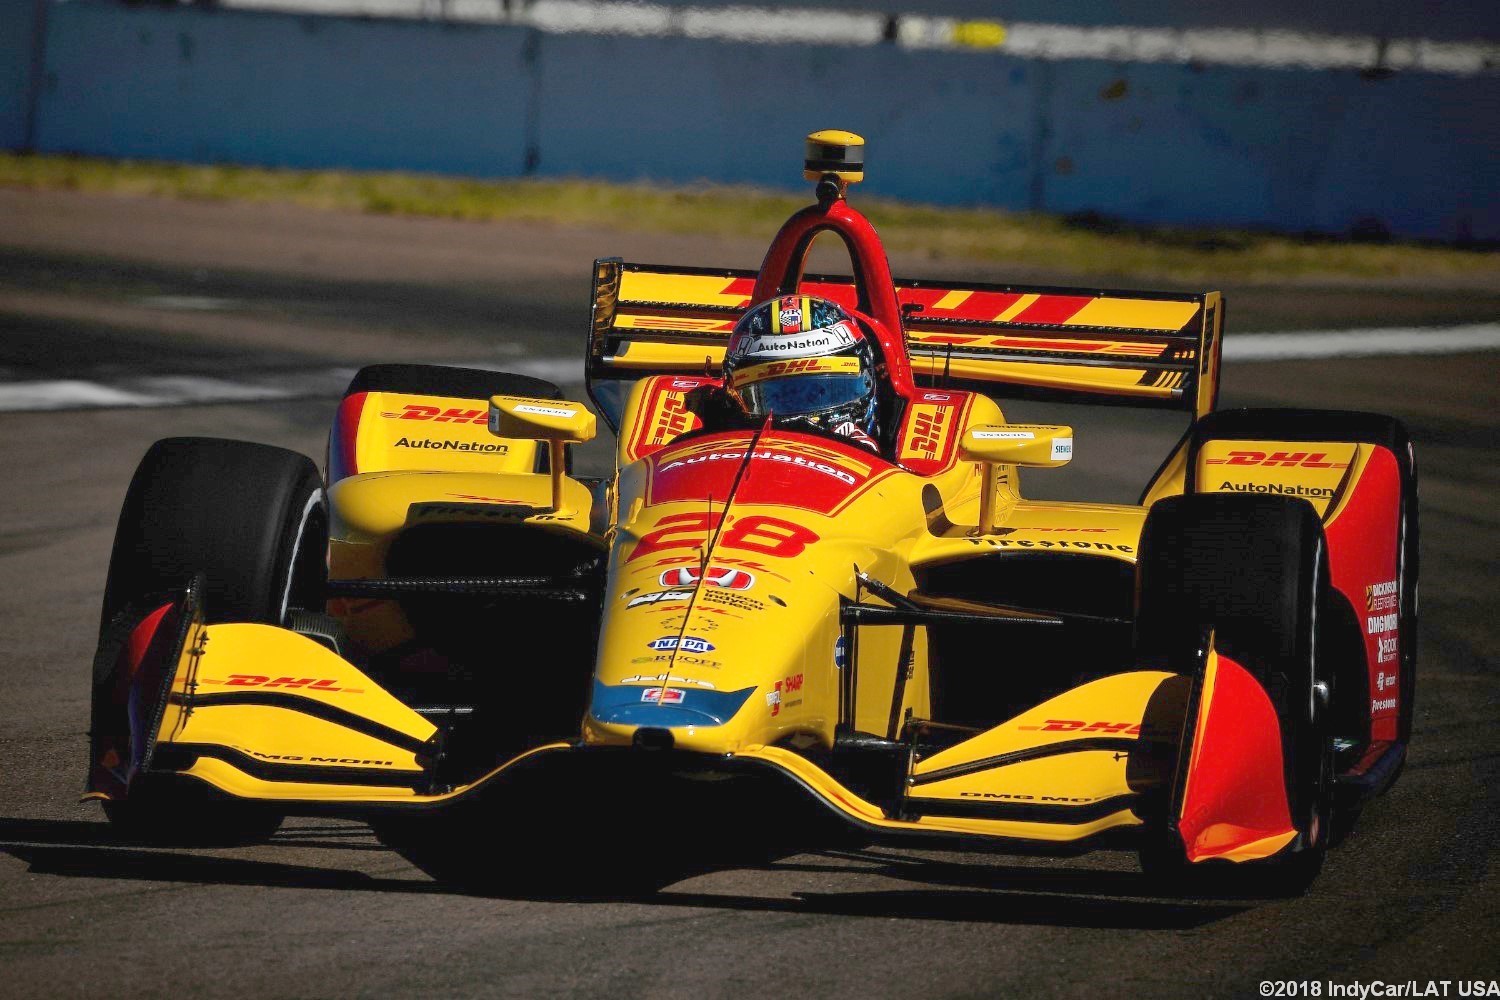 DHL has a big presence in IndyCar too with Ryan Hunter-Reay